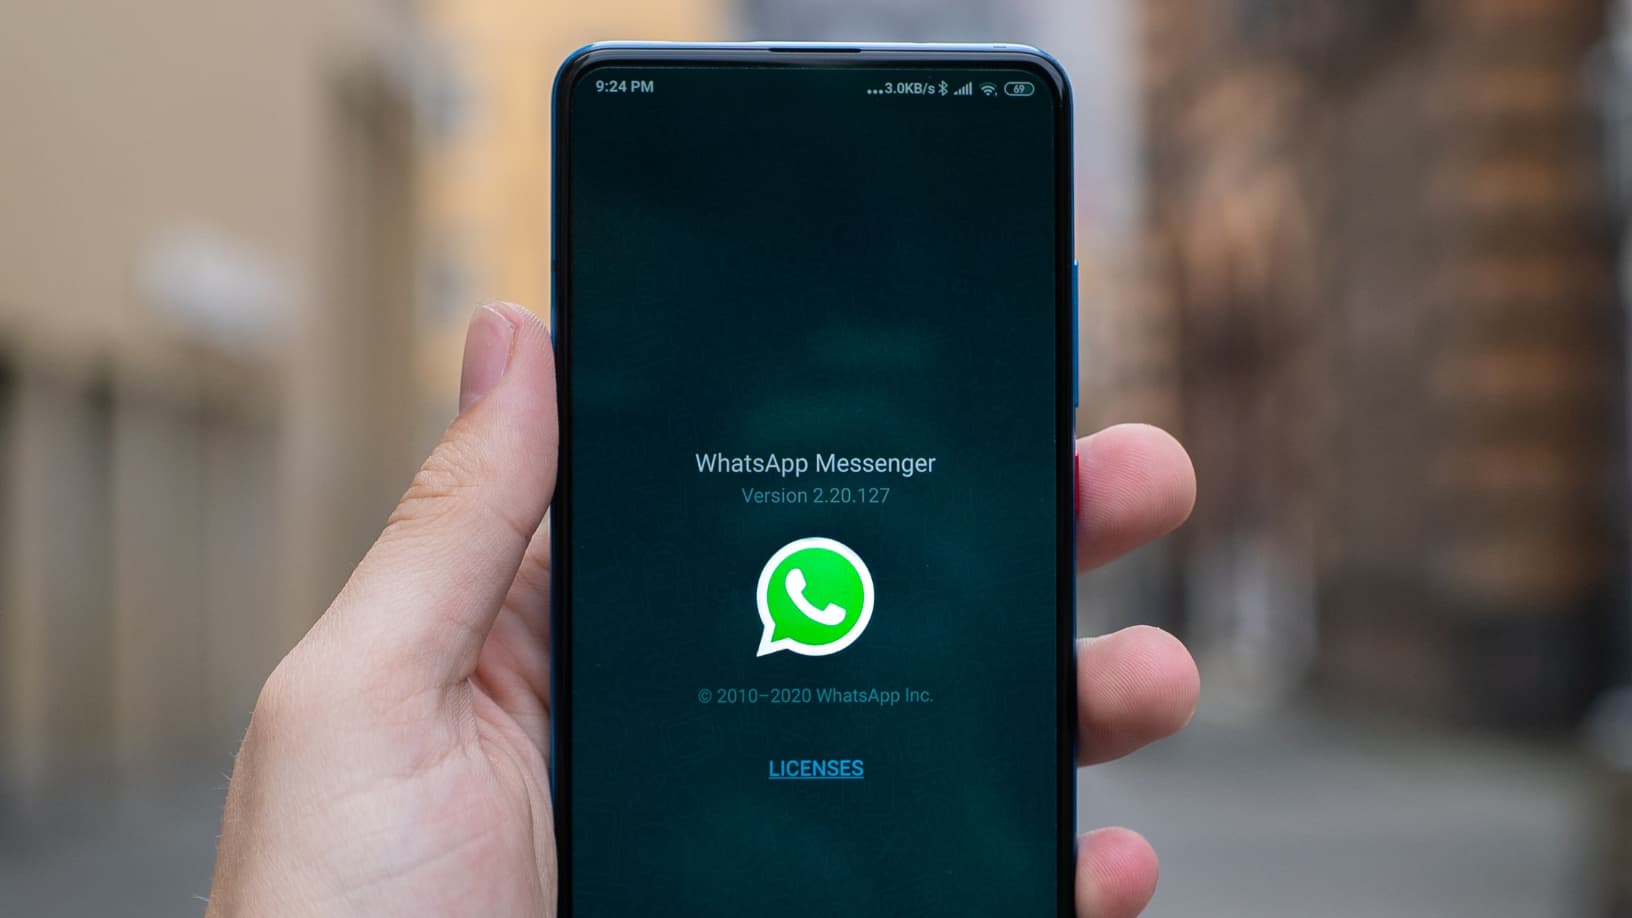 Here’s how to send high quality images on WhatsApp